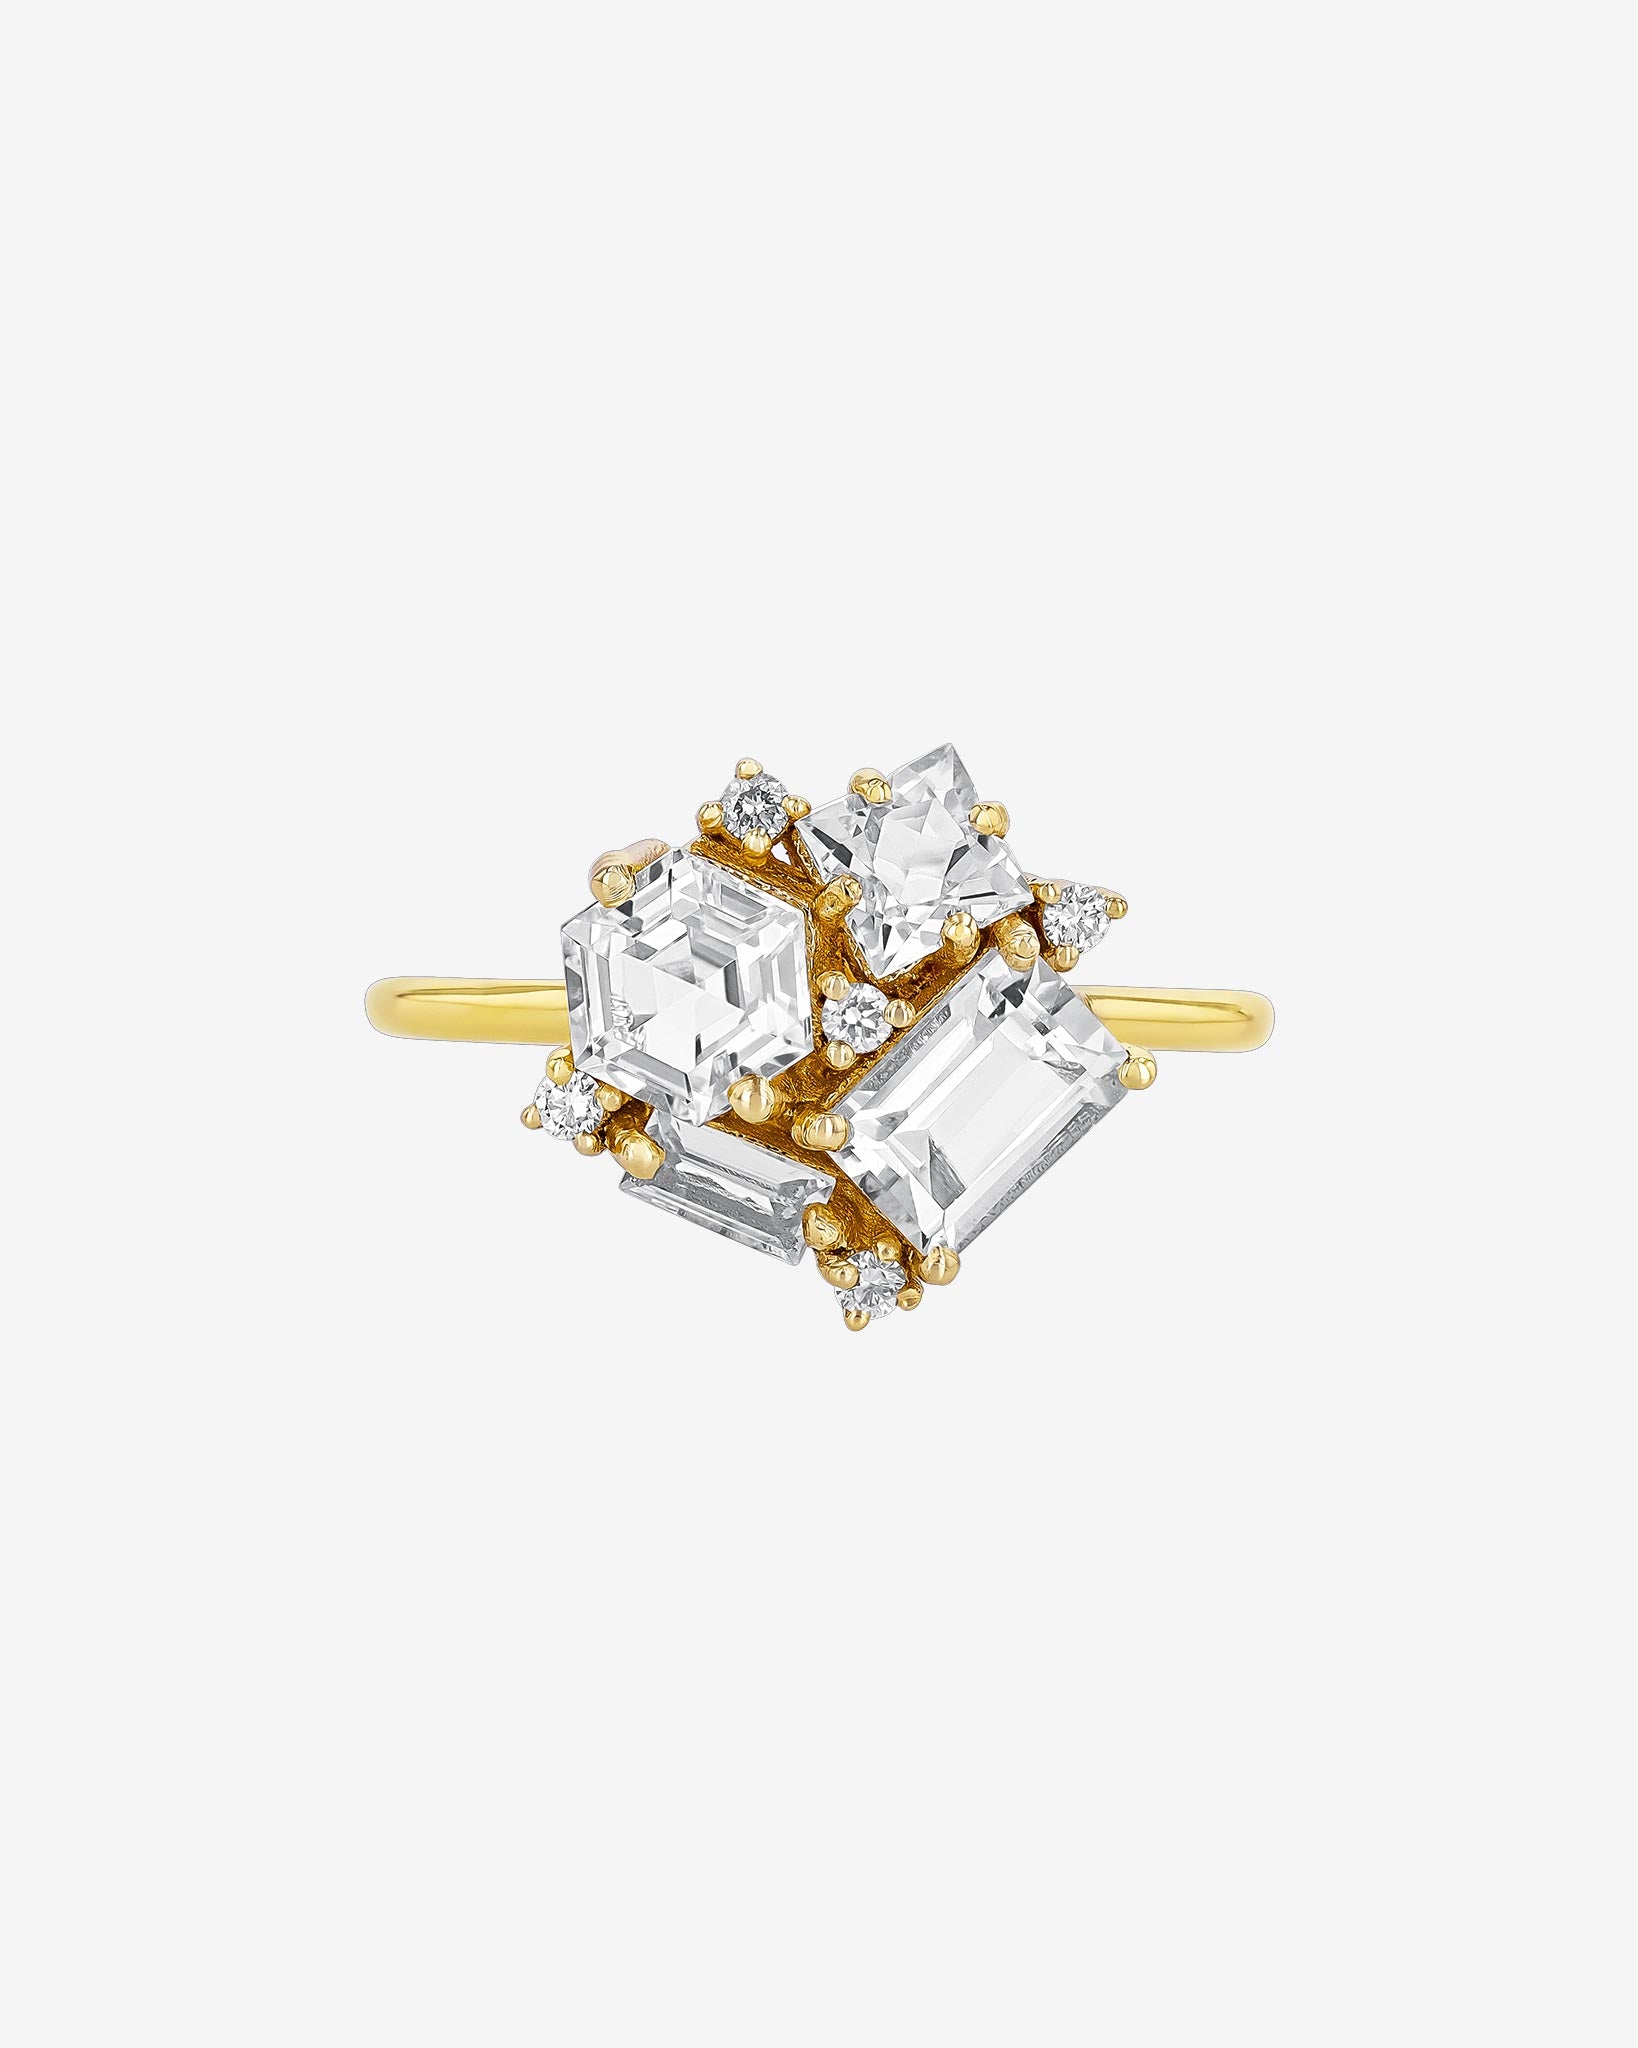 Kalan By Suzanne Kalan Amalfi White Topaz Blossom Ring in 14k yellow gold